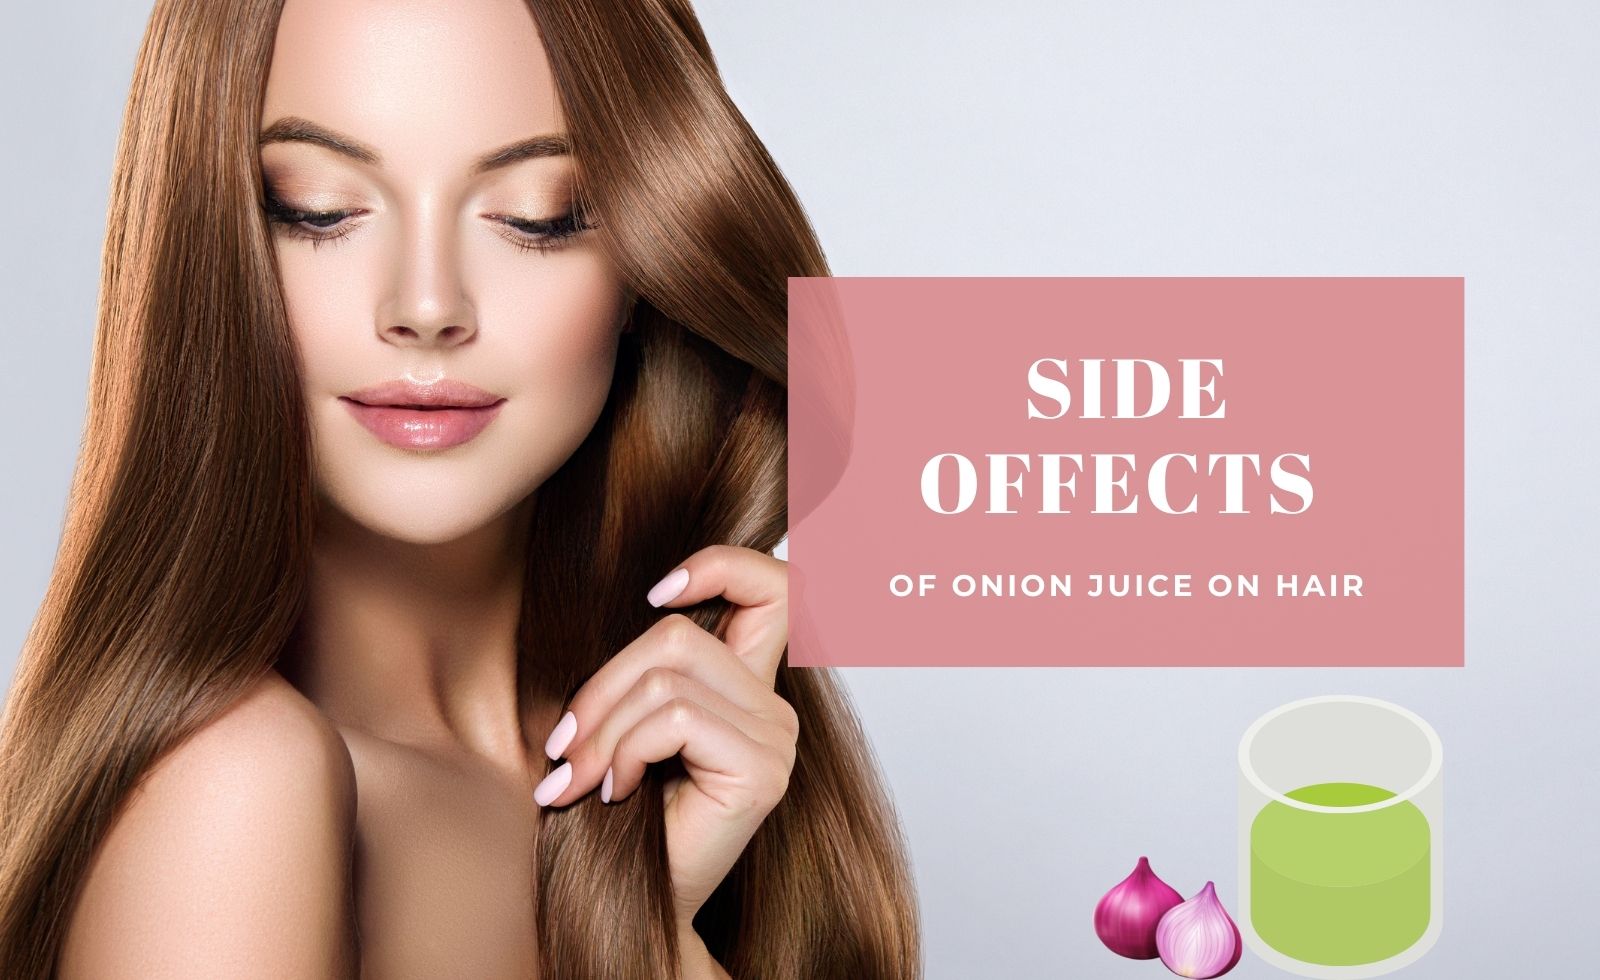 Side effects of onion juice on hair